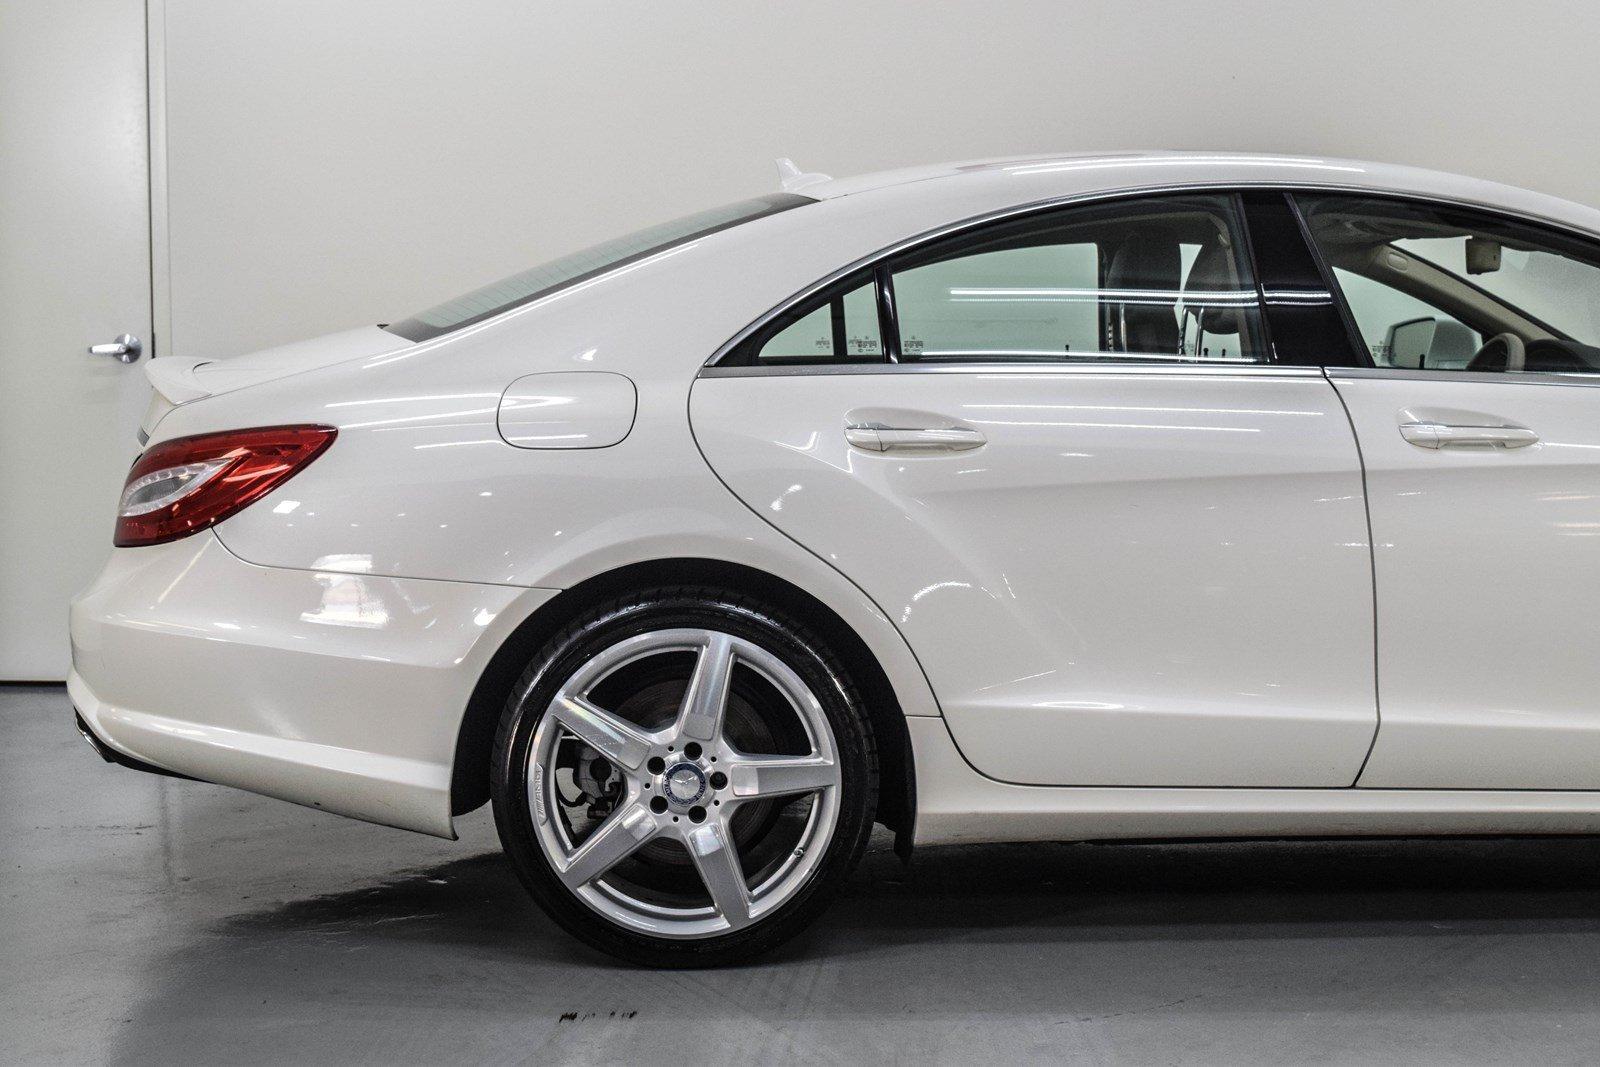 Used 2014 Mercedes-Benz CLS-Class CLS550 for sale Sold at Gravity Autos Marietta in Marietta GA 30060 25